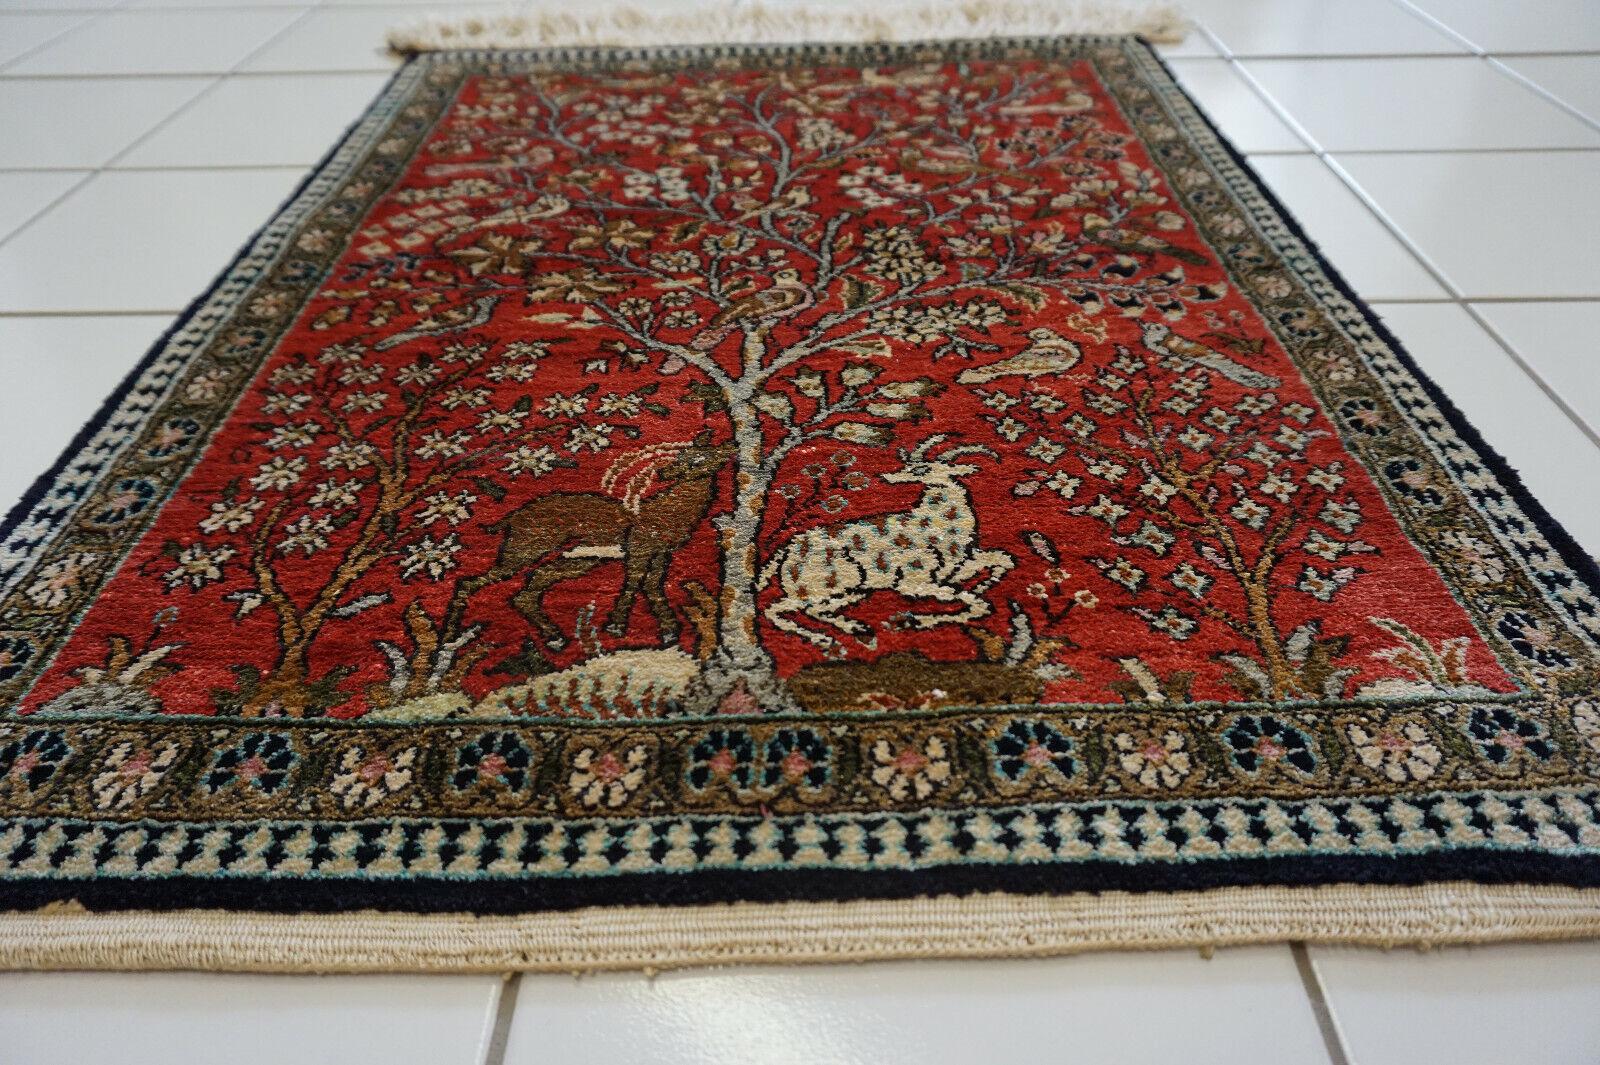 Hand-Knotted Handmade Vintage Persian Style Qum Silk Rug 1.9' x 2.5', 1970s - 1D64 For Sale